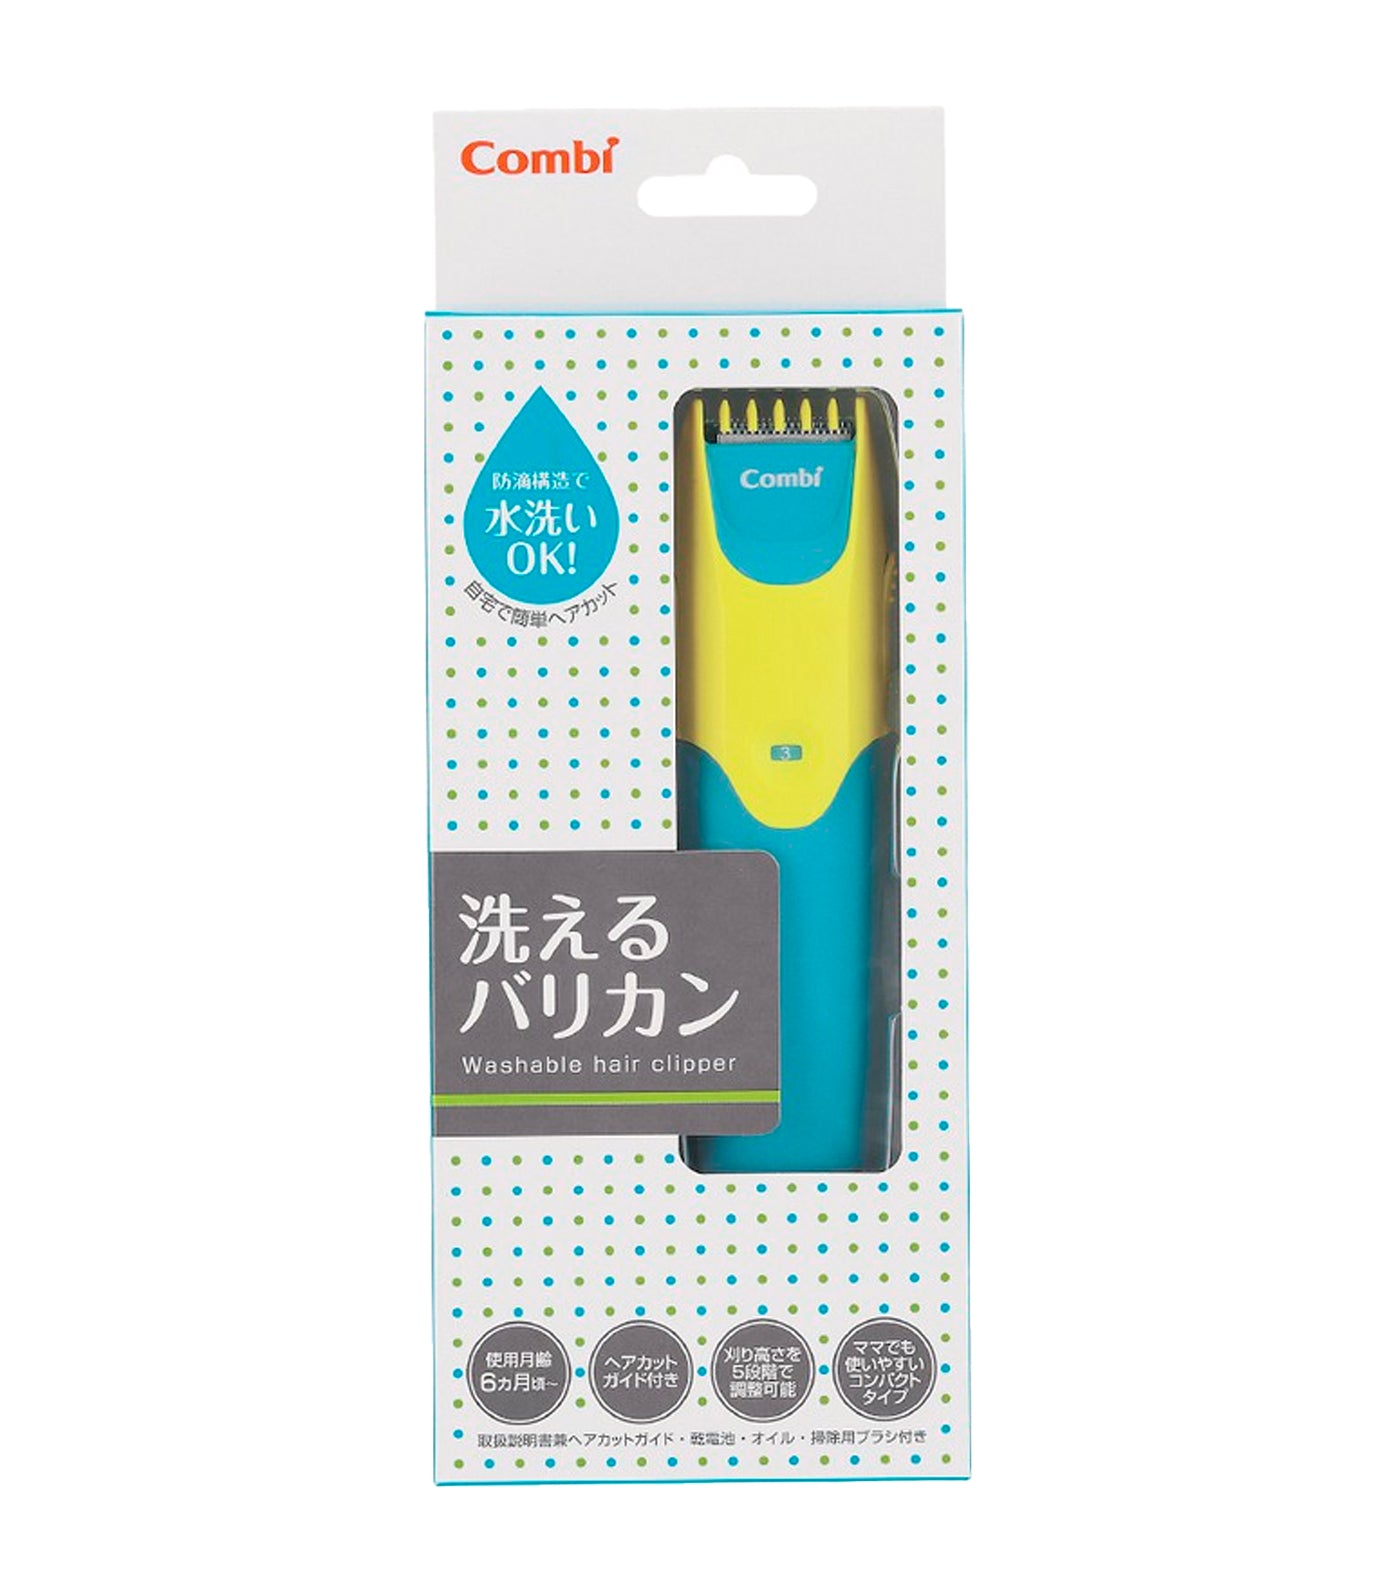 combi washable hair clipper